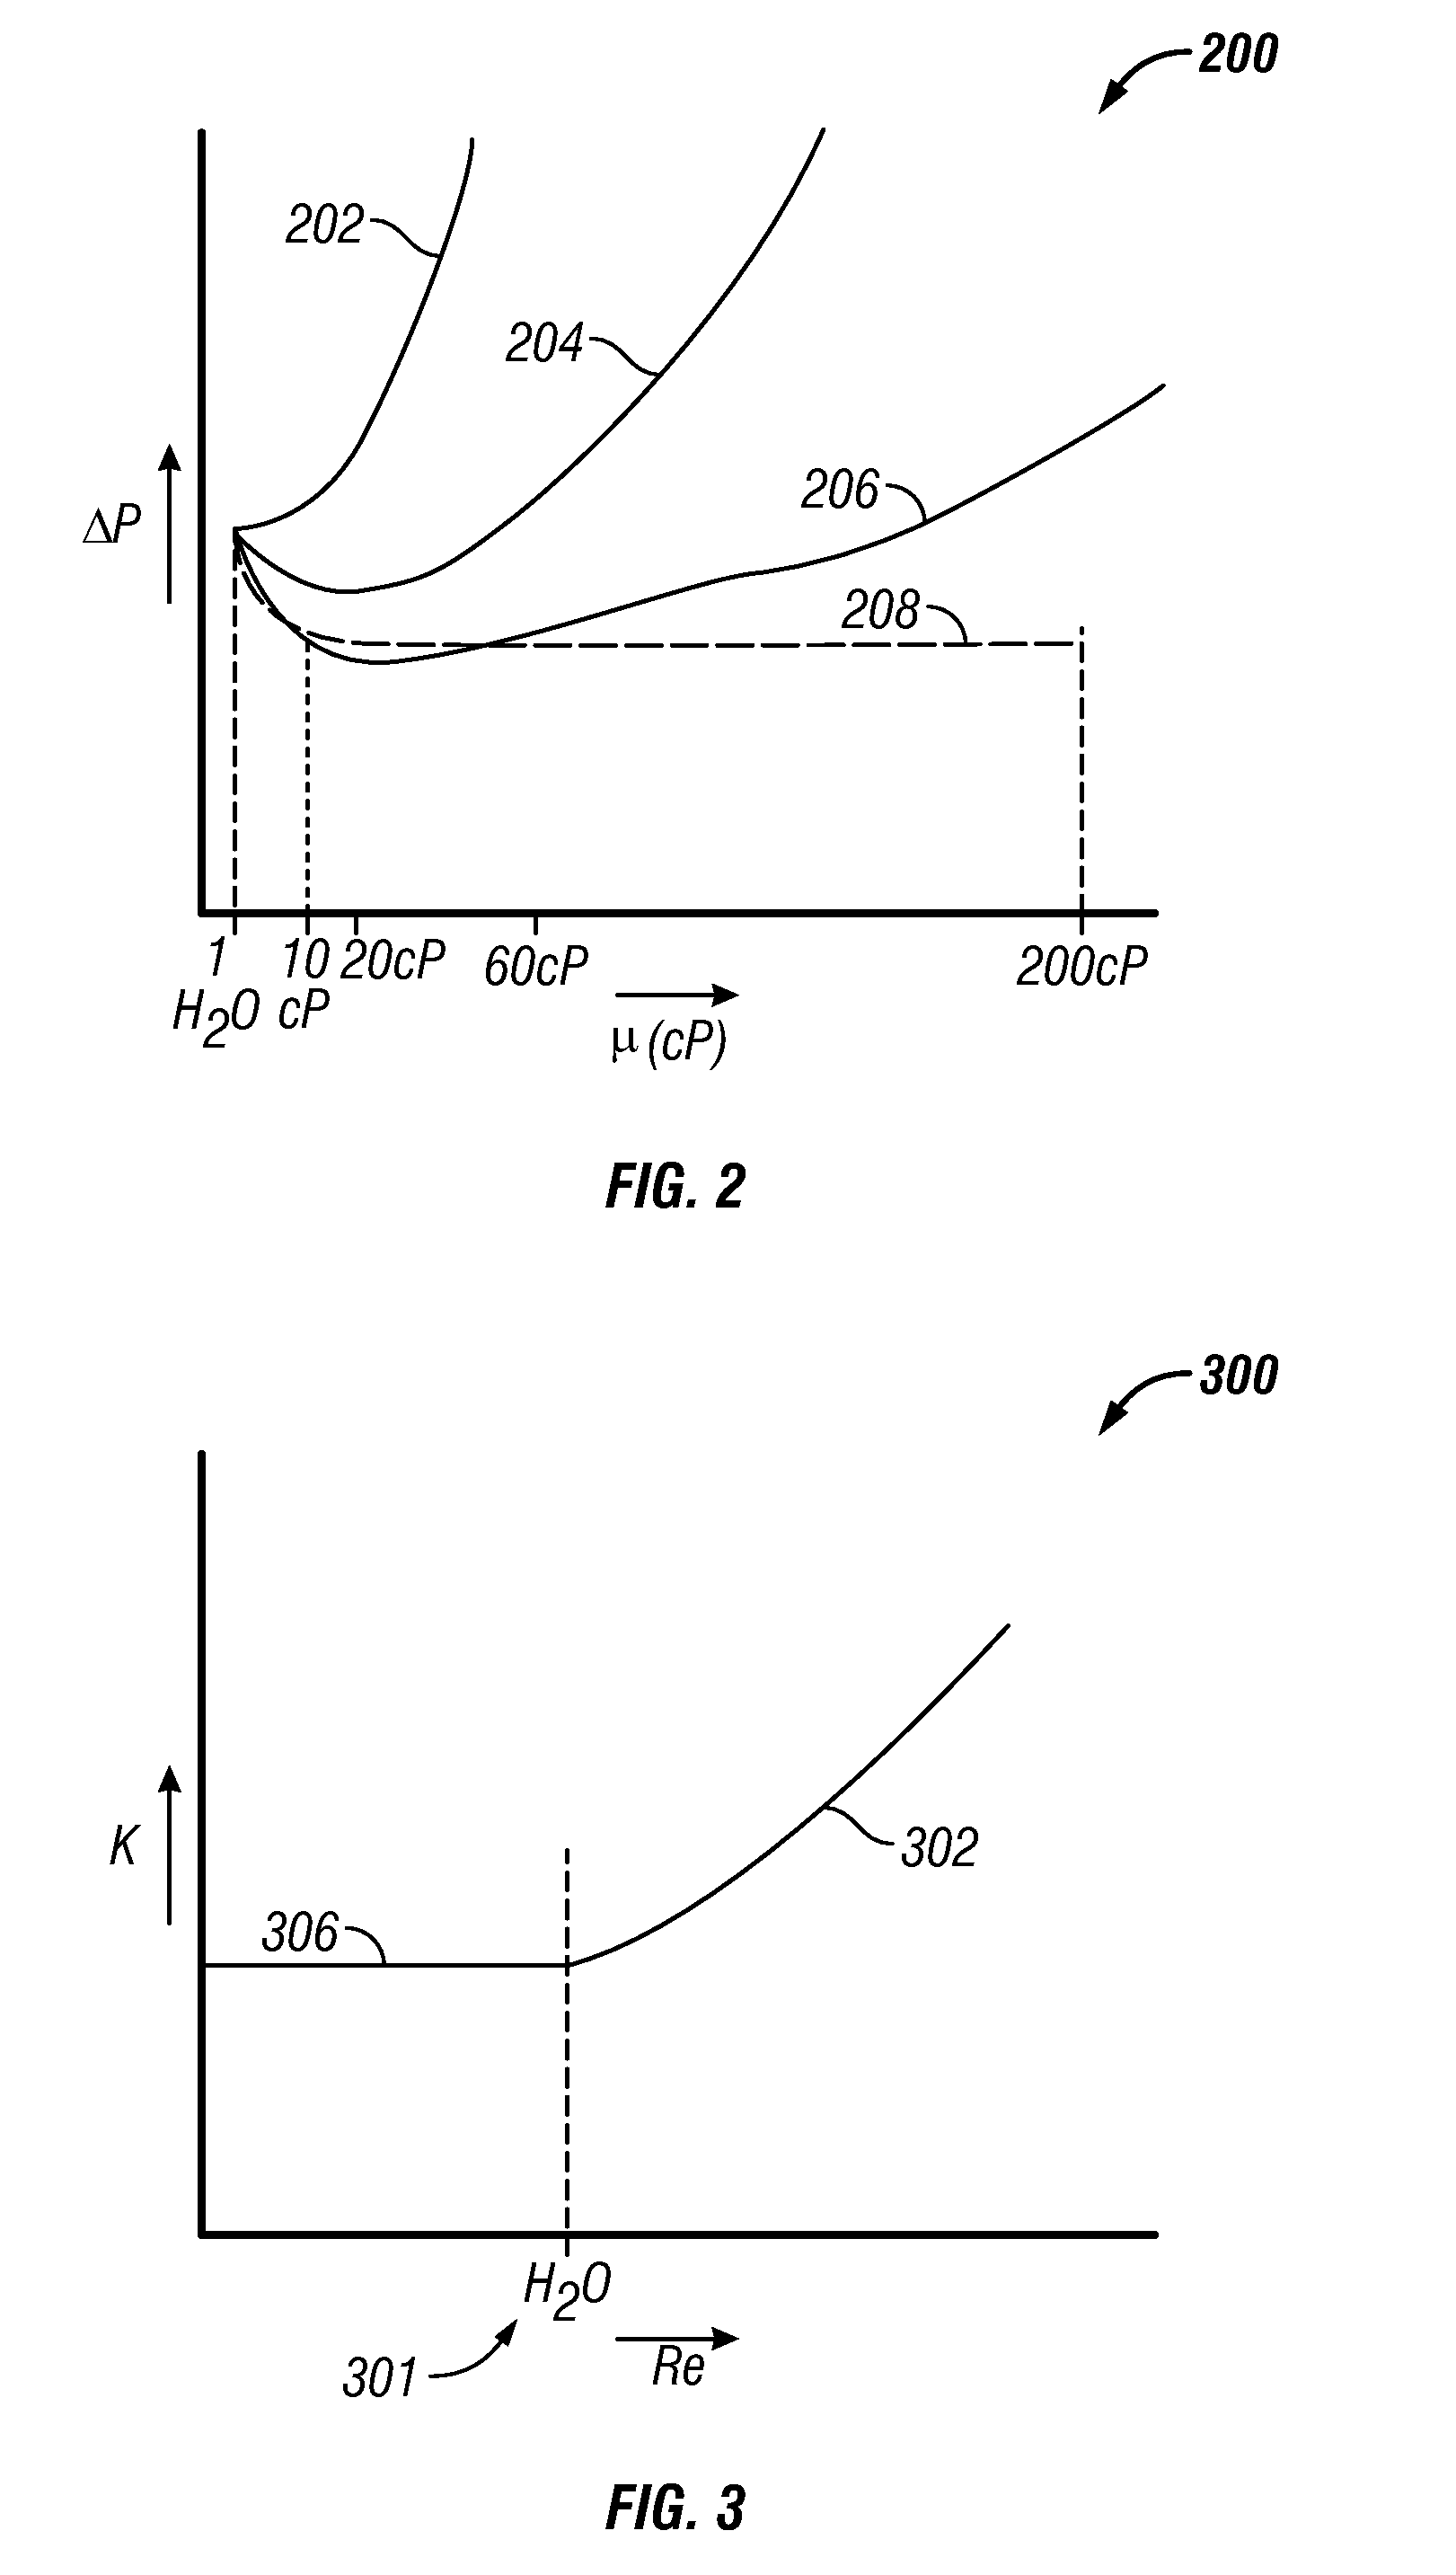 Method of Providing a Flow Control Device That Substantially Reduces Fluid Flow Between a Formation and a Wellbore When a Selected Property of the Fluid is in a Selected Range